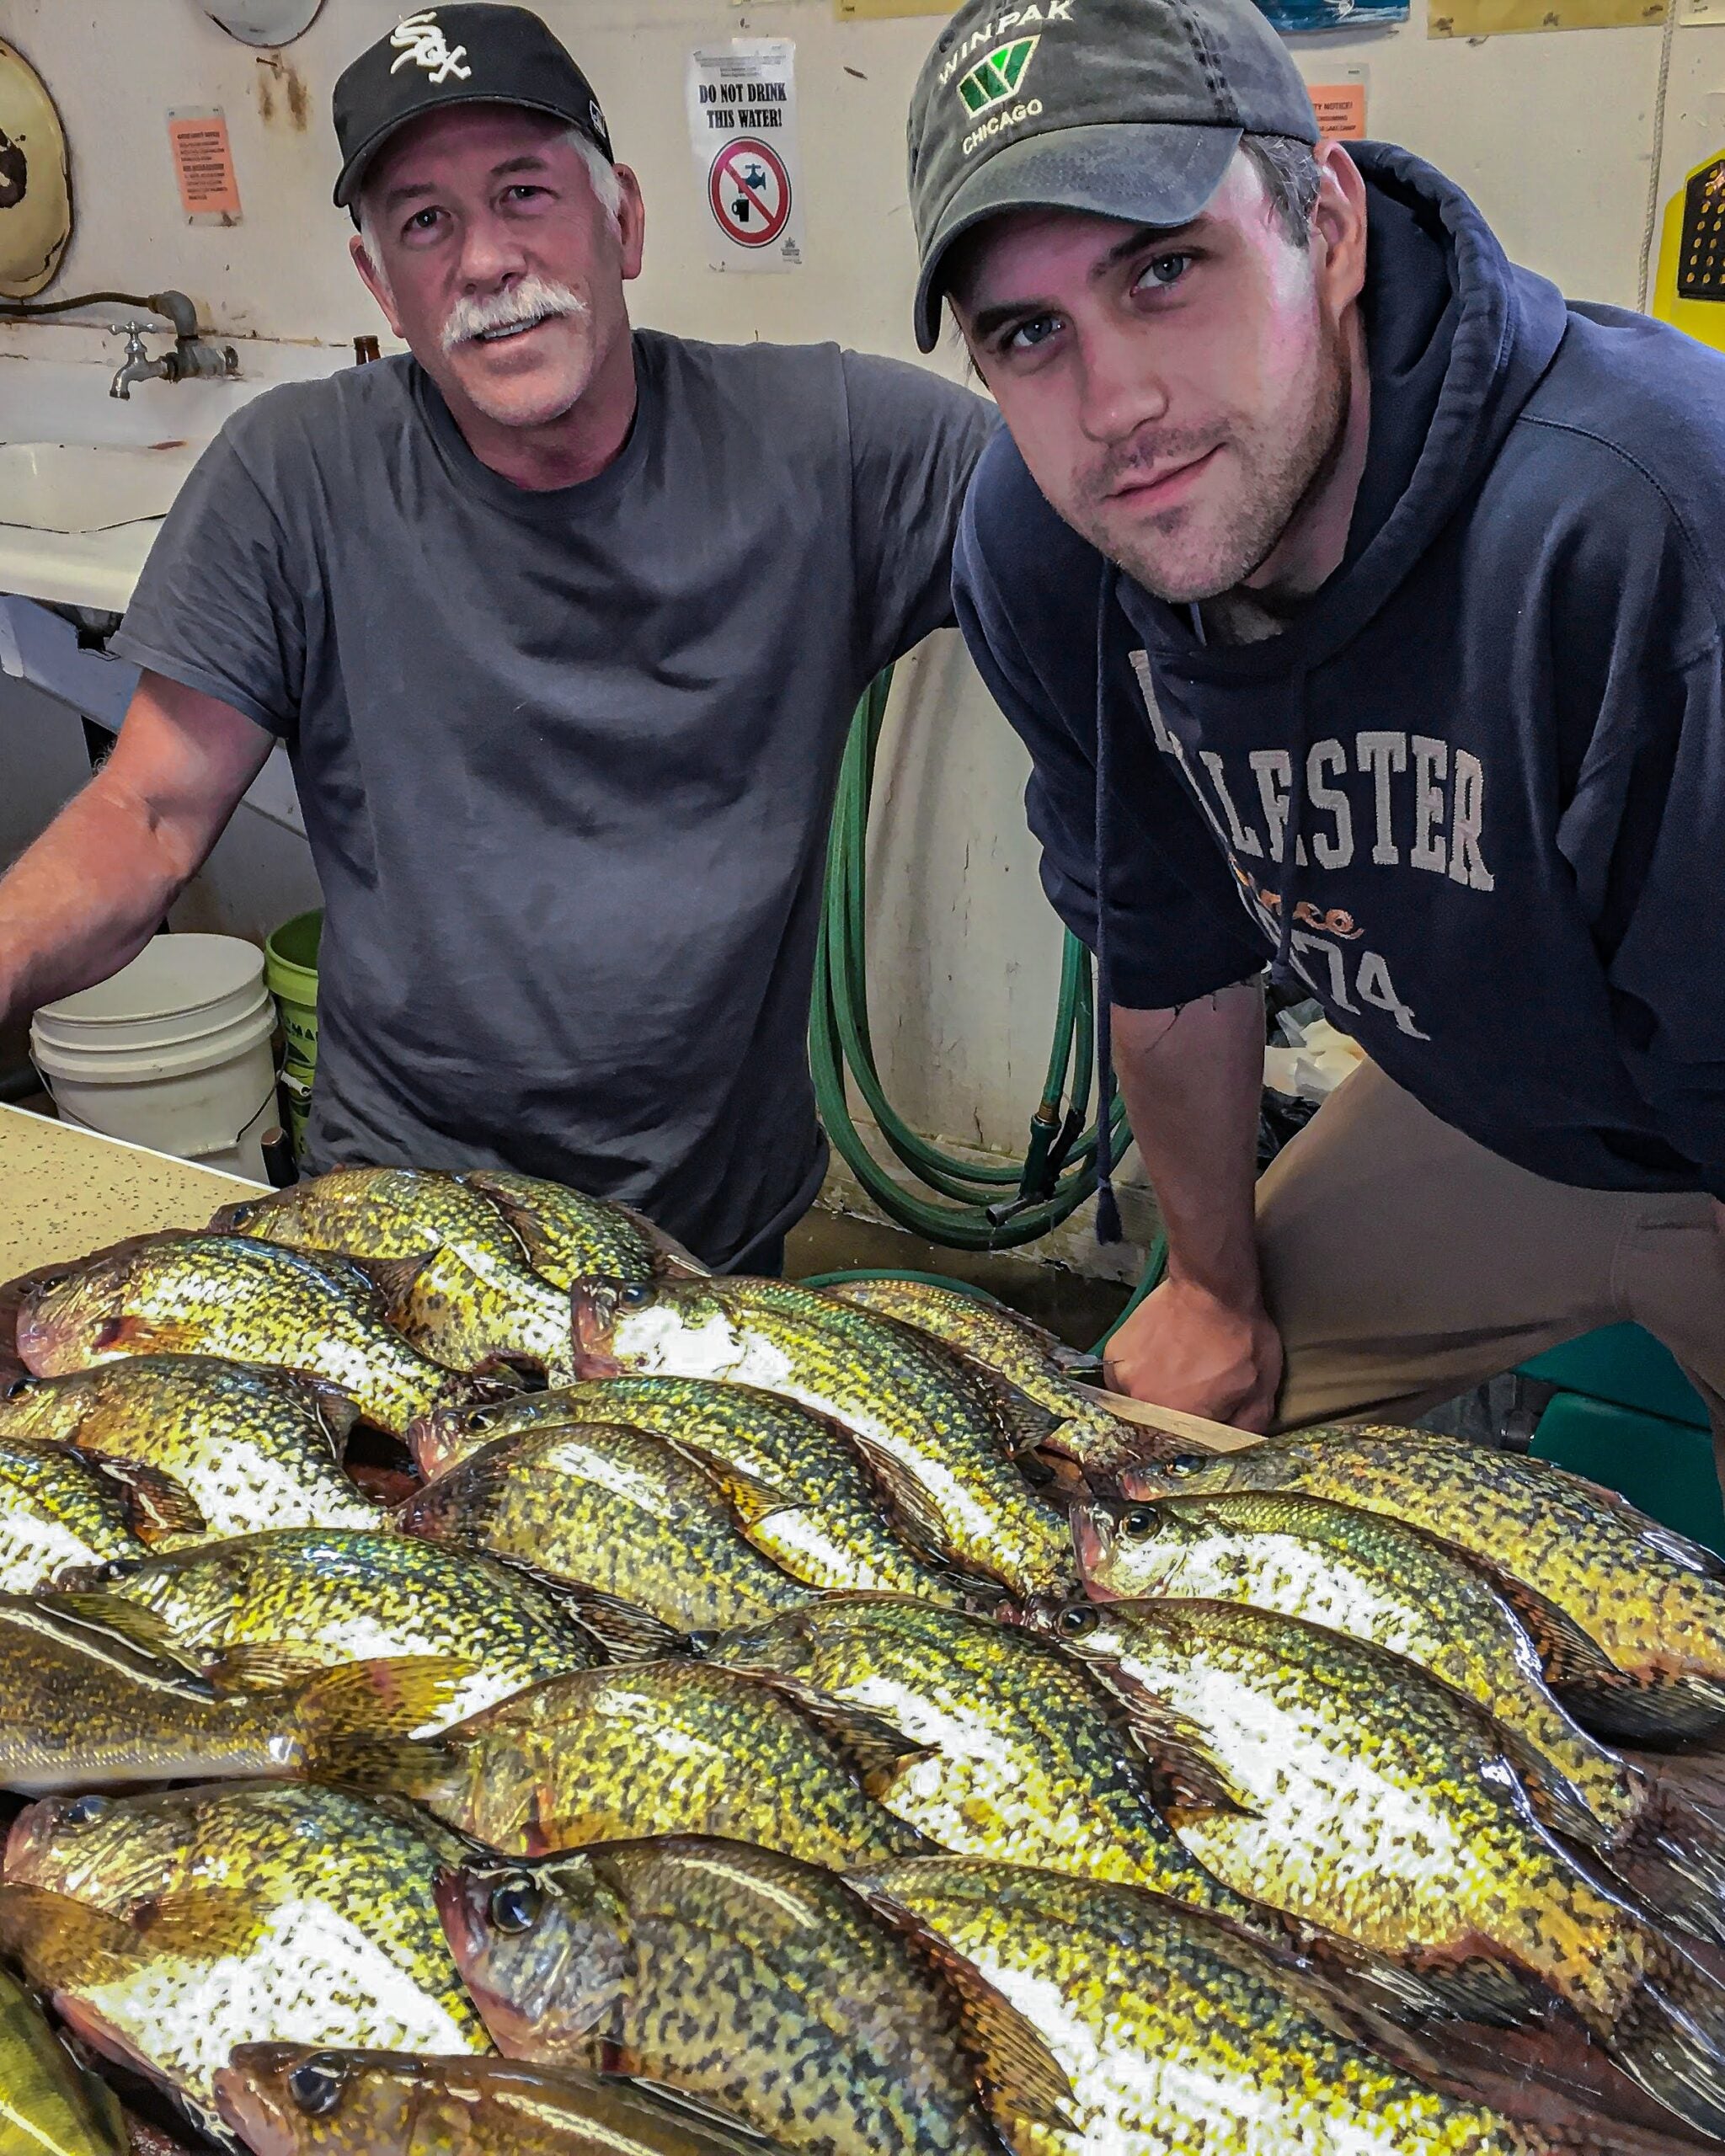 Two fishermen in navy blue shirts stand behind a table of dead crappies.